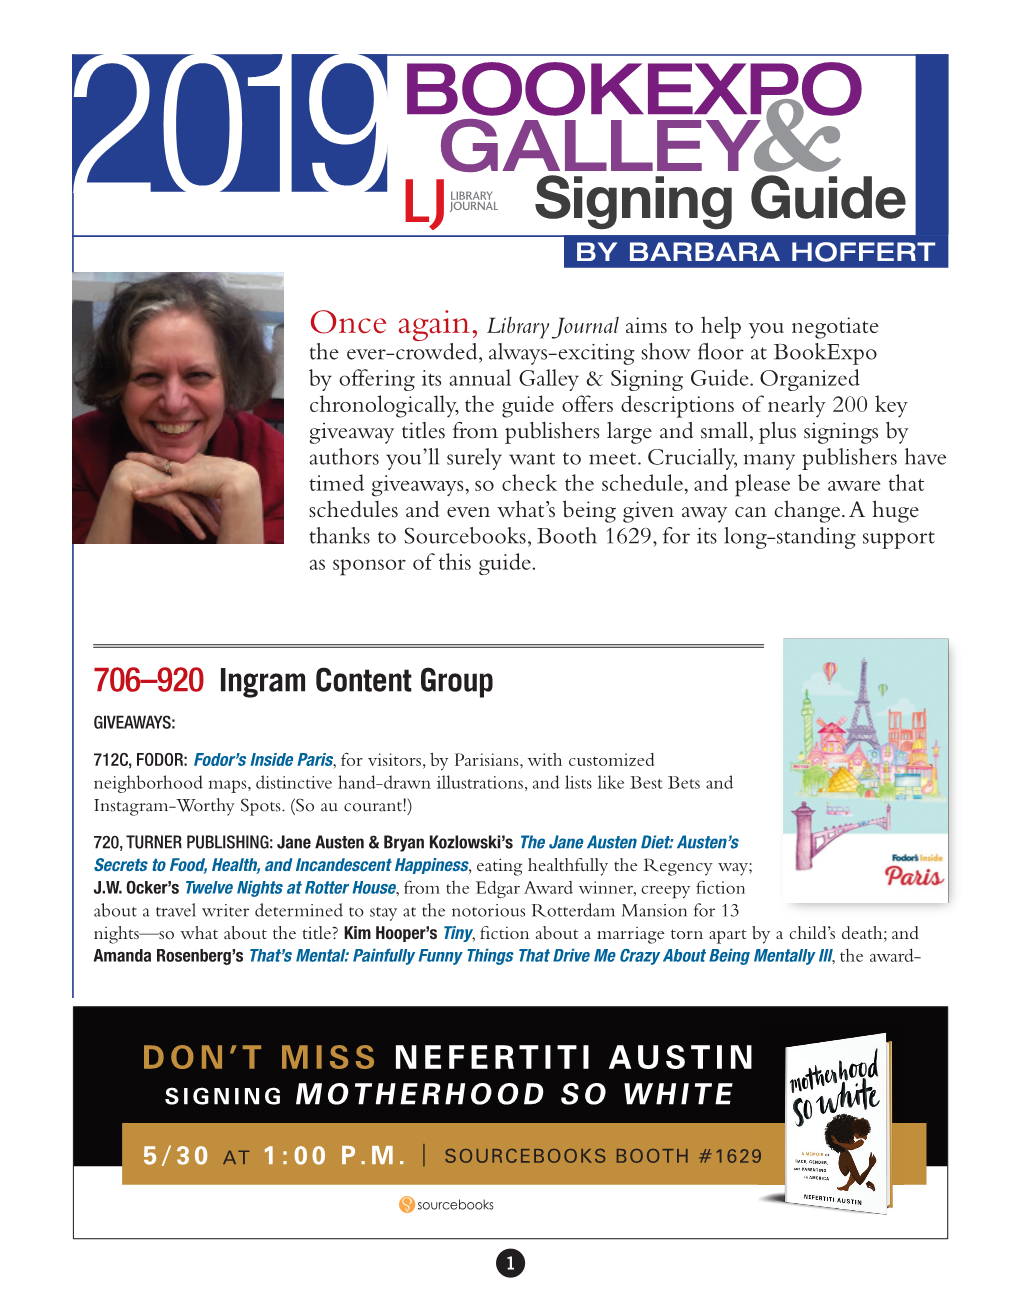 BOOKEXPO GALLEY& 2019 Signing Guide by BARBARA HOFFERT